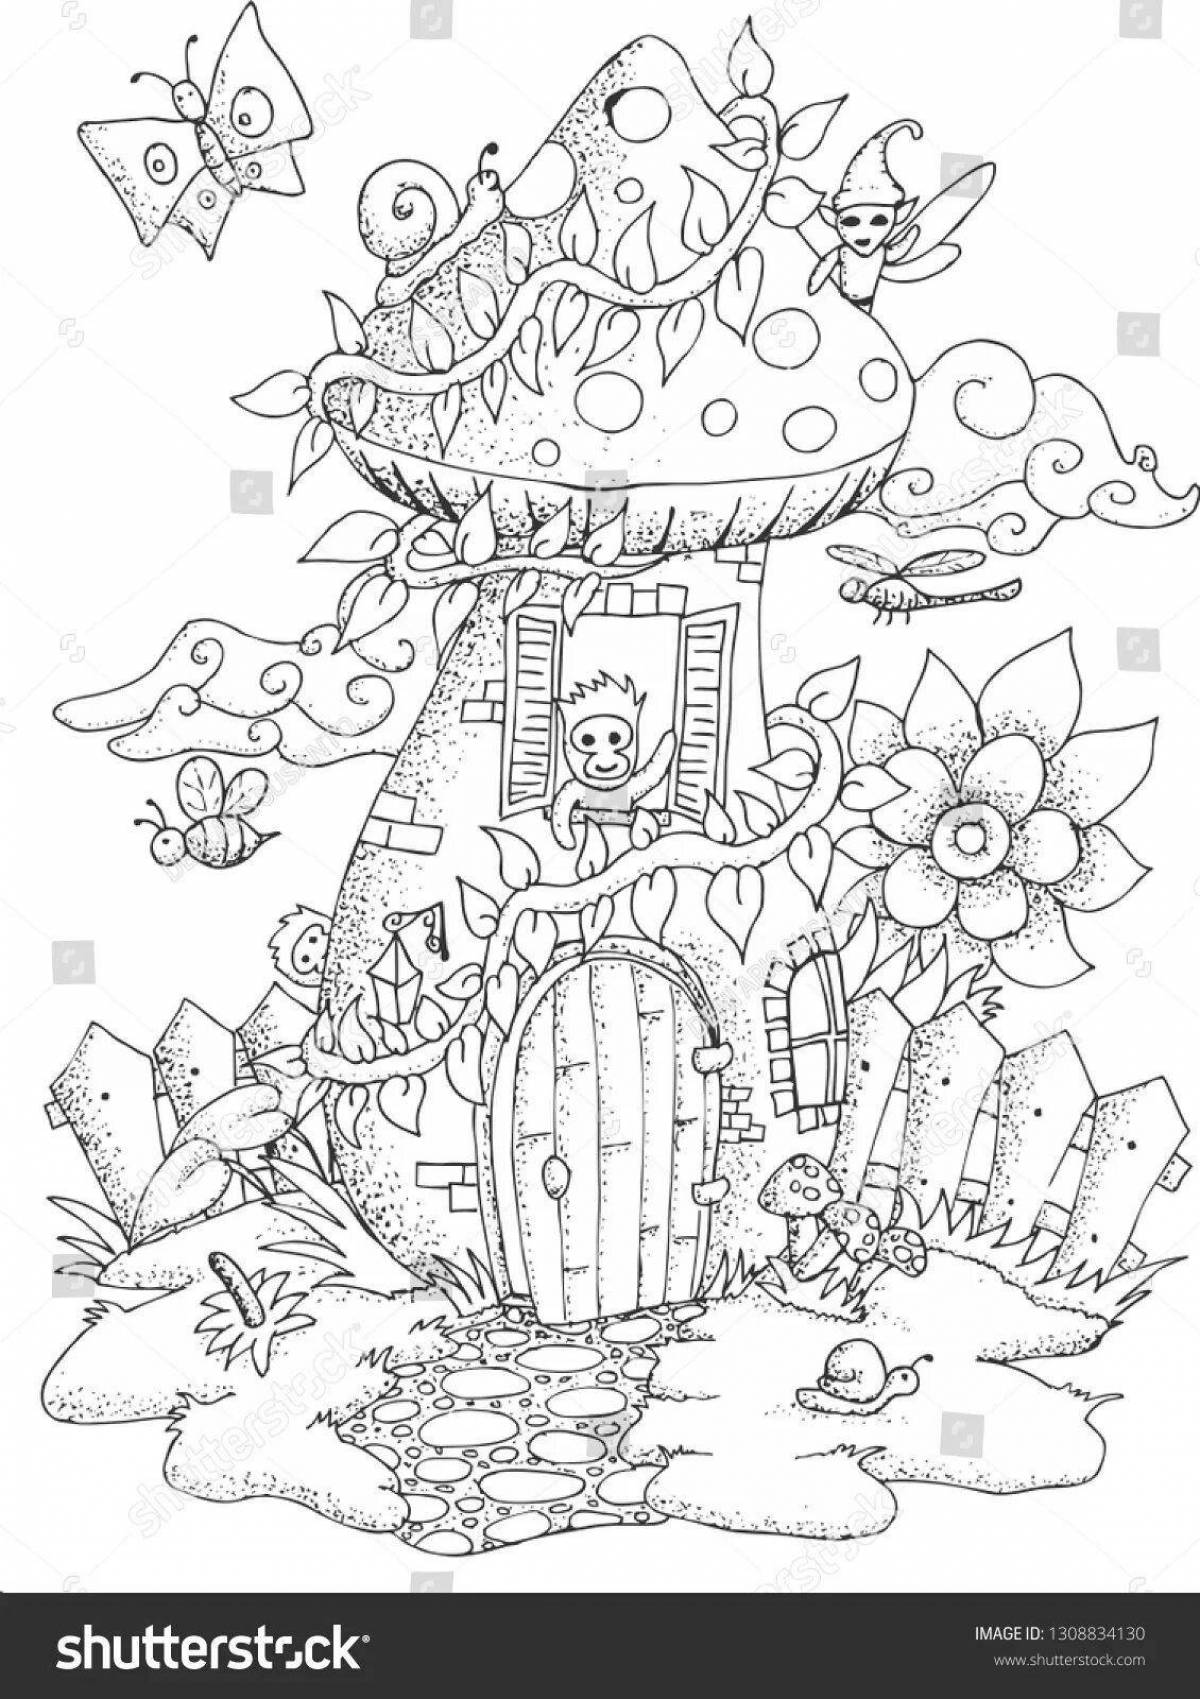 Exotic magic house coloring book